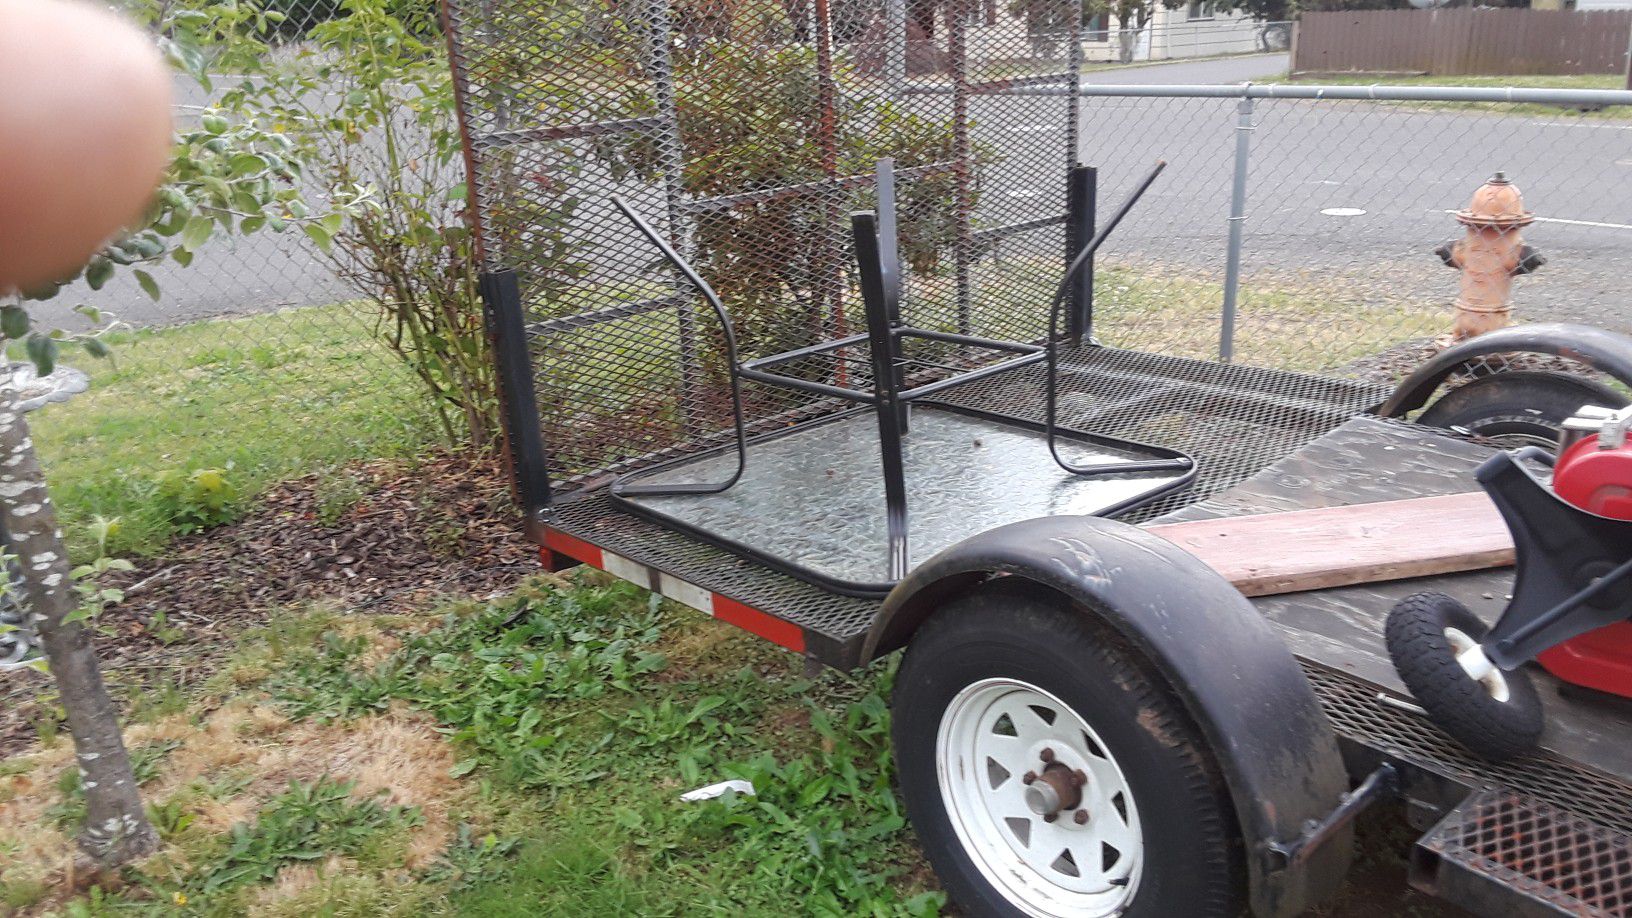 Flatbed with drop gate 6 by 12 good trailer okay tires don't use it no more 400 bucks best offer